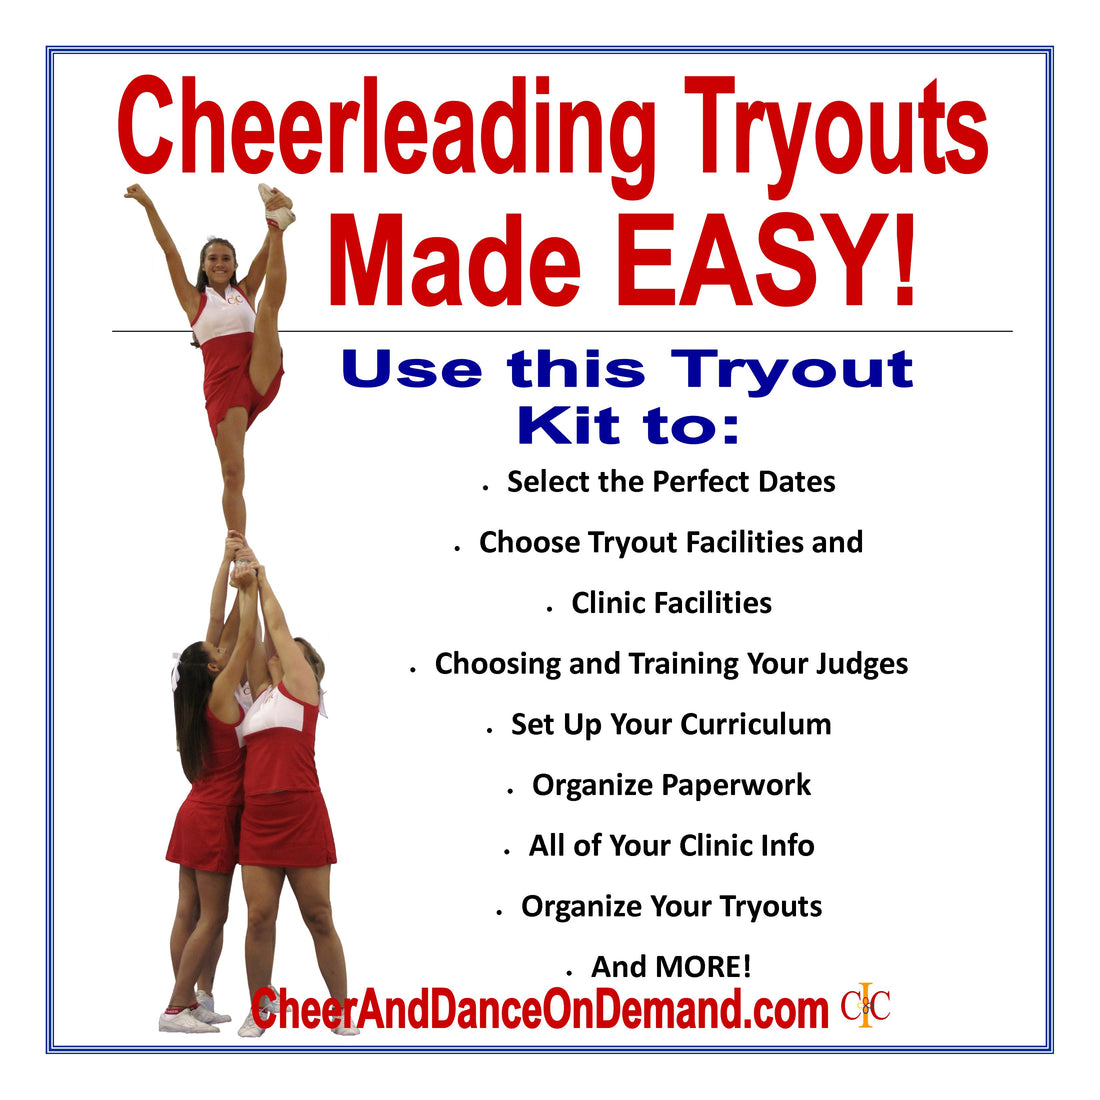 Free Download Cheerleading Tryouts Made Easy Cheer And Dance On Demand 